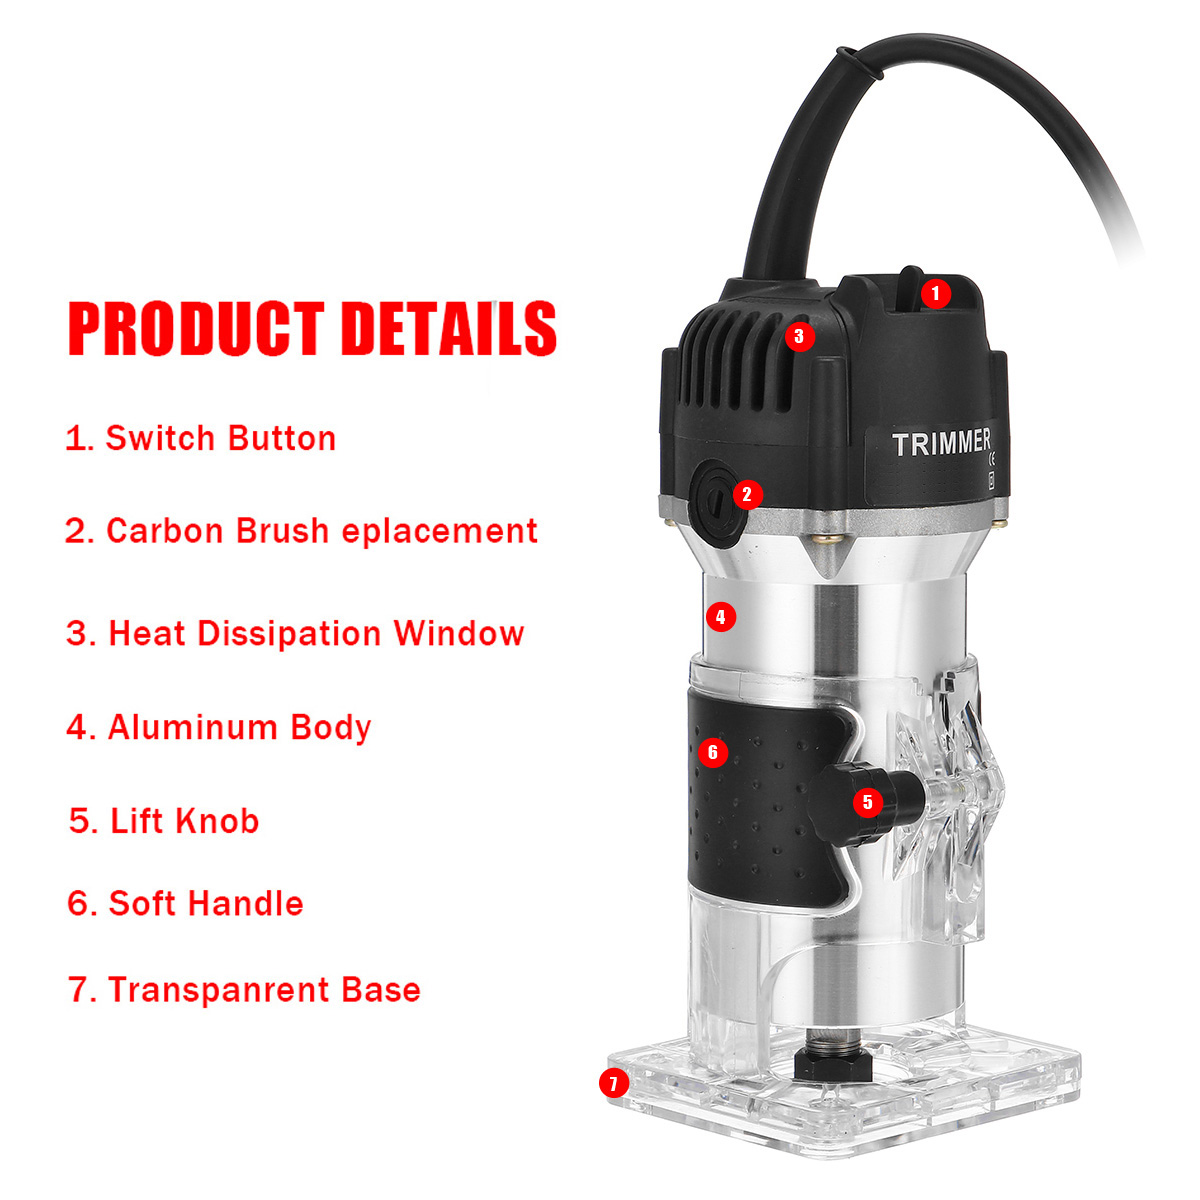 800W-Electric-Hand-Trimmer-Wood-Laminate-Palm-Router-Joiner-Tool-1784360-9